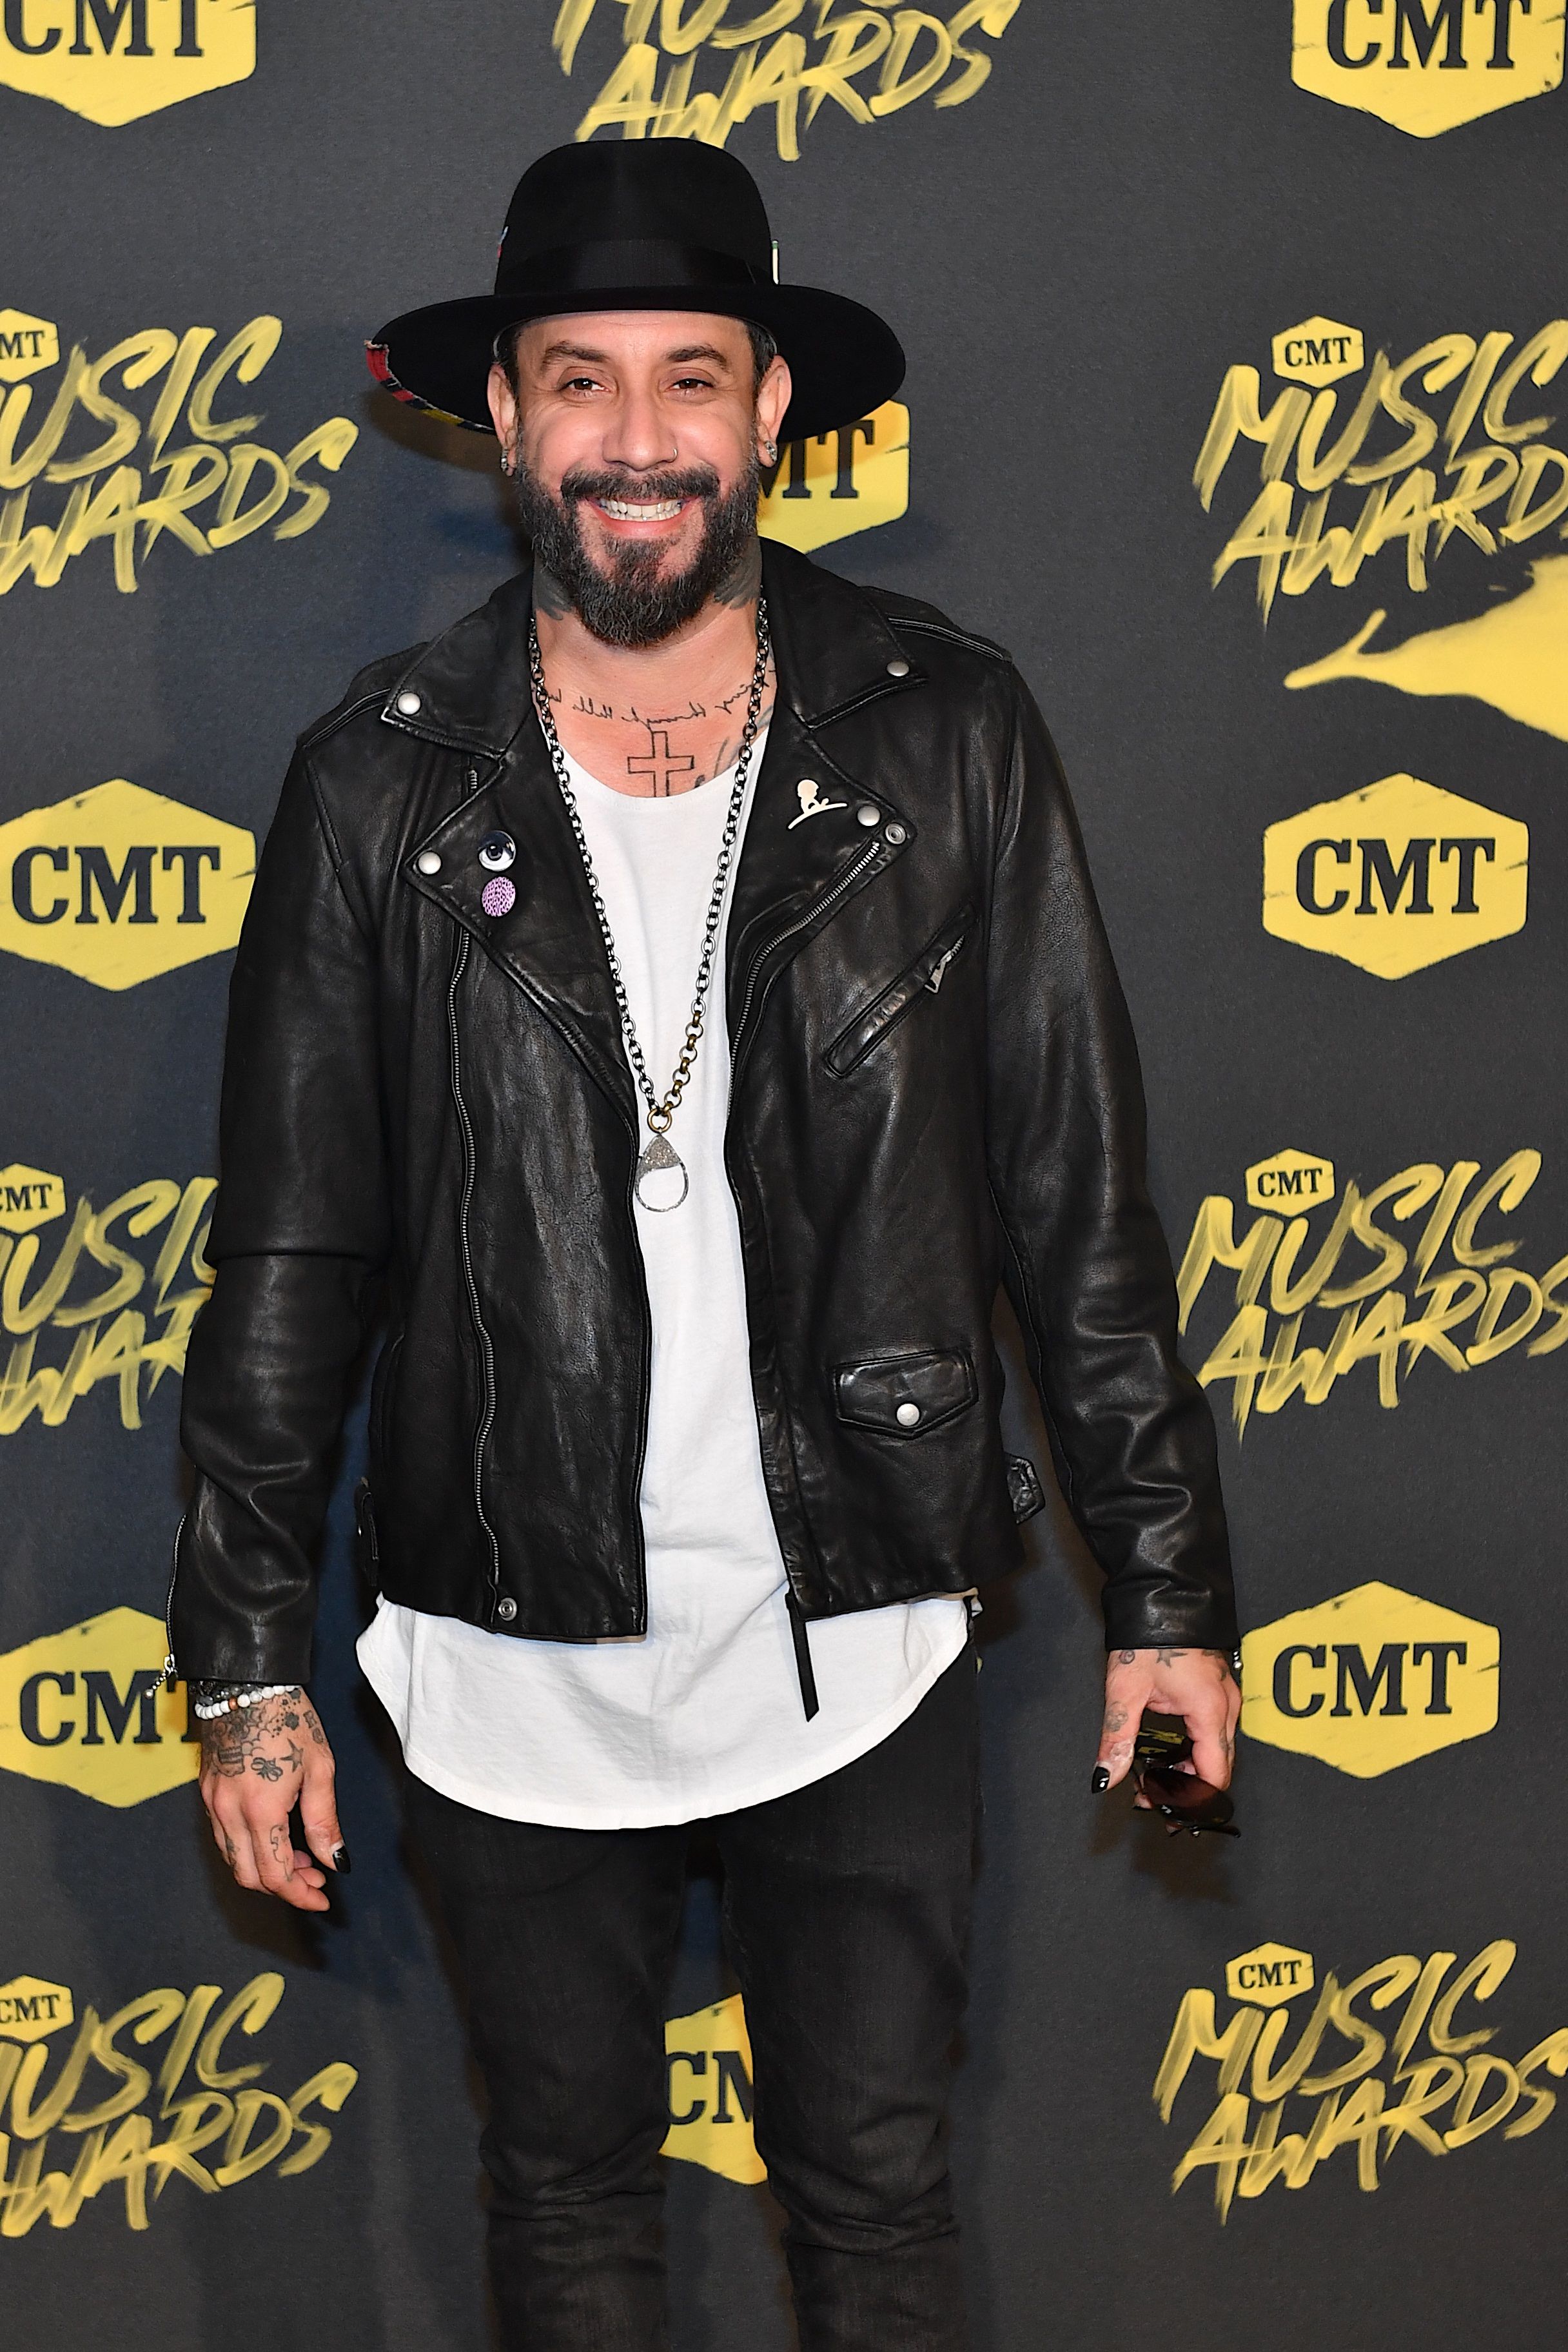 Recording Artist A.J. McLean at the 2018 CMT Music Awards at Bridgestone Arena on June 6, 2018 | Photo: Getty Images